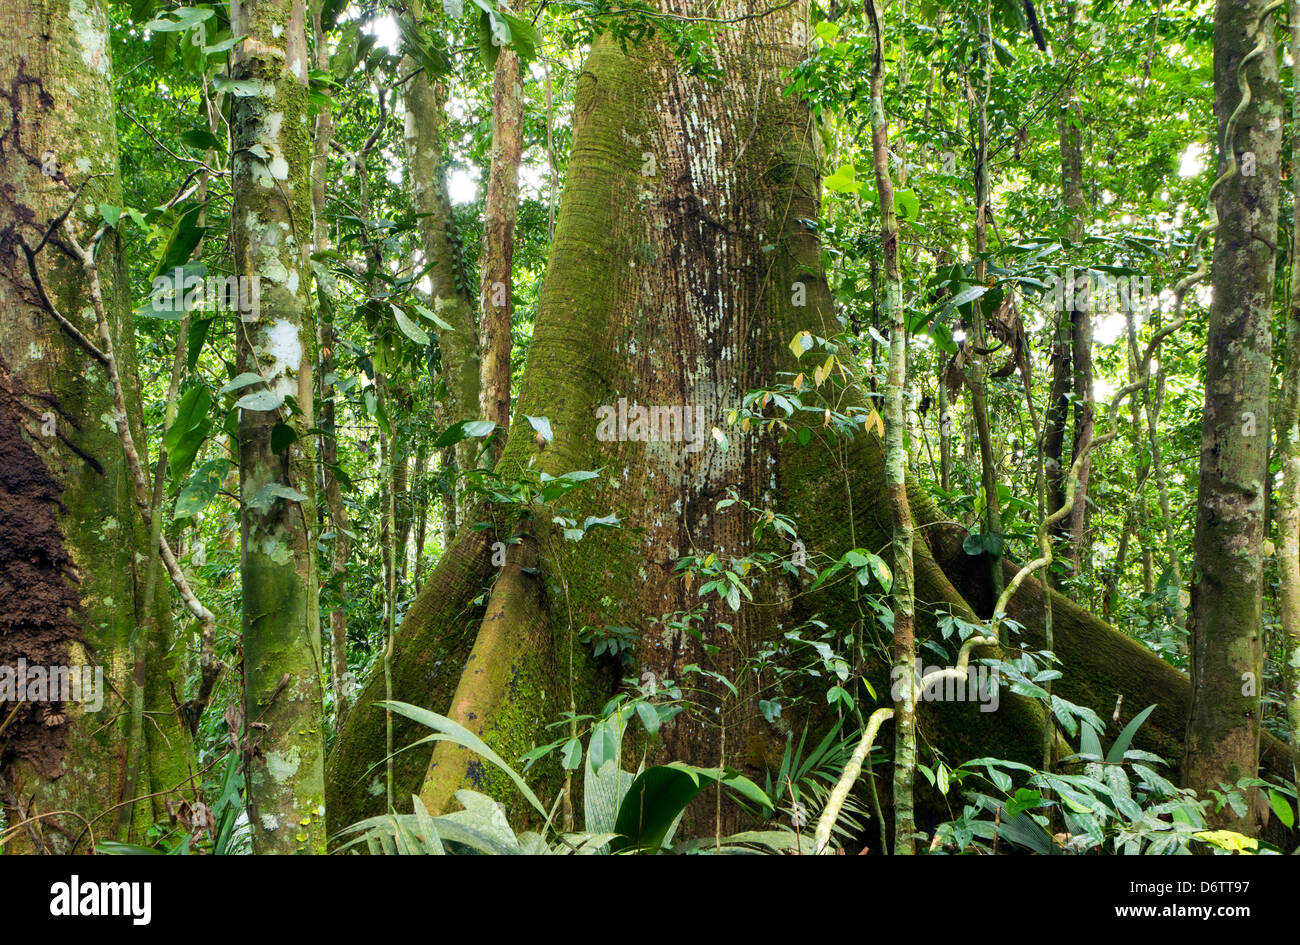 Large tree with buttress roots in primary tropical rainforest, Ecuador Stock Photo